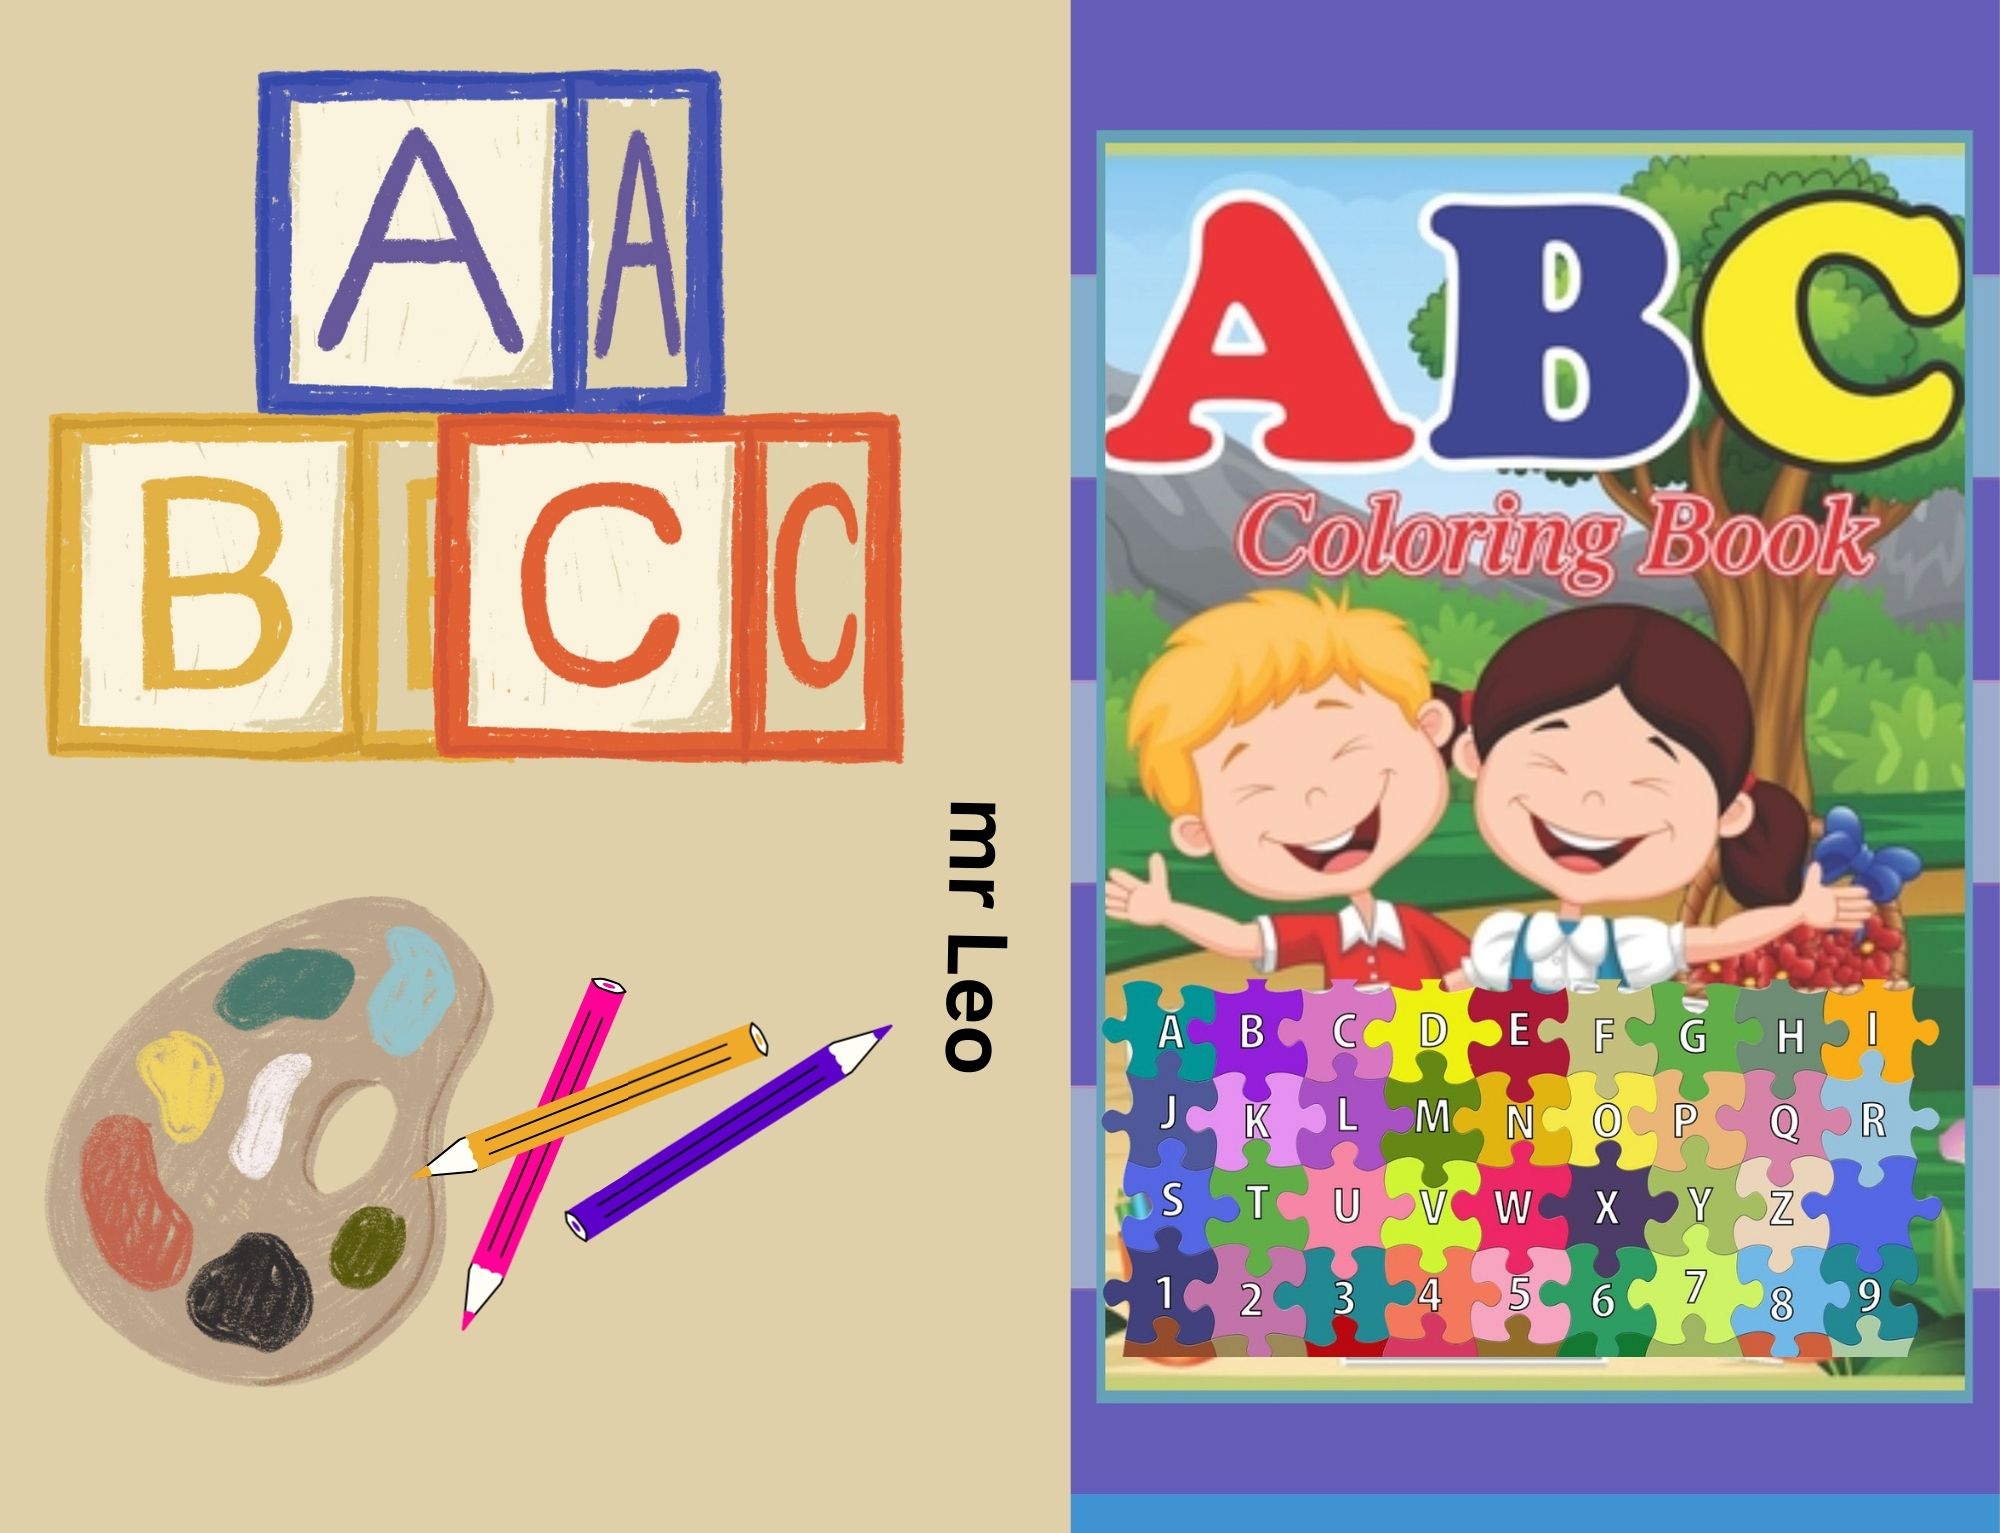 abc coloring book for kids - learn alphabets with fun of colors